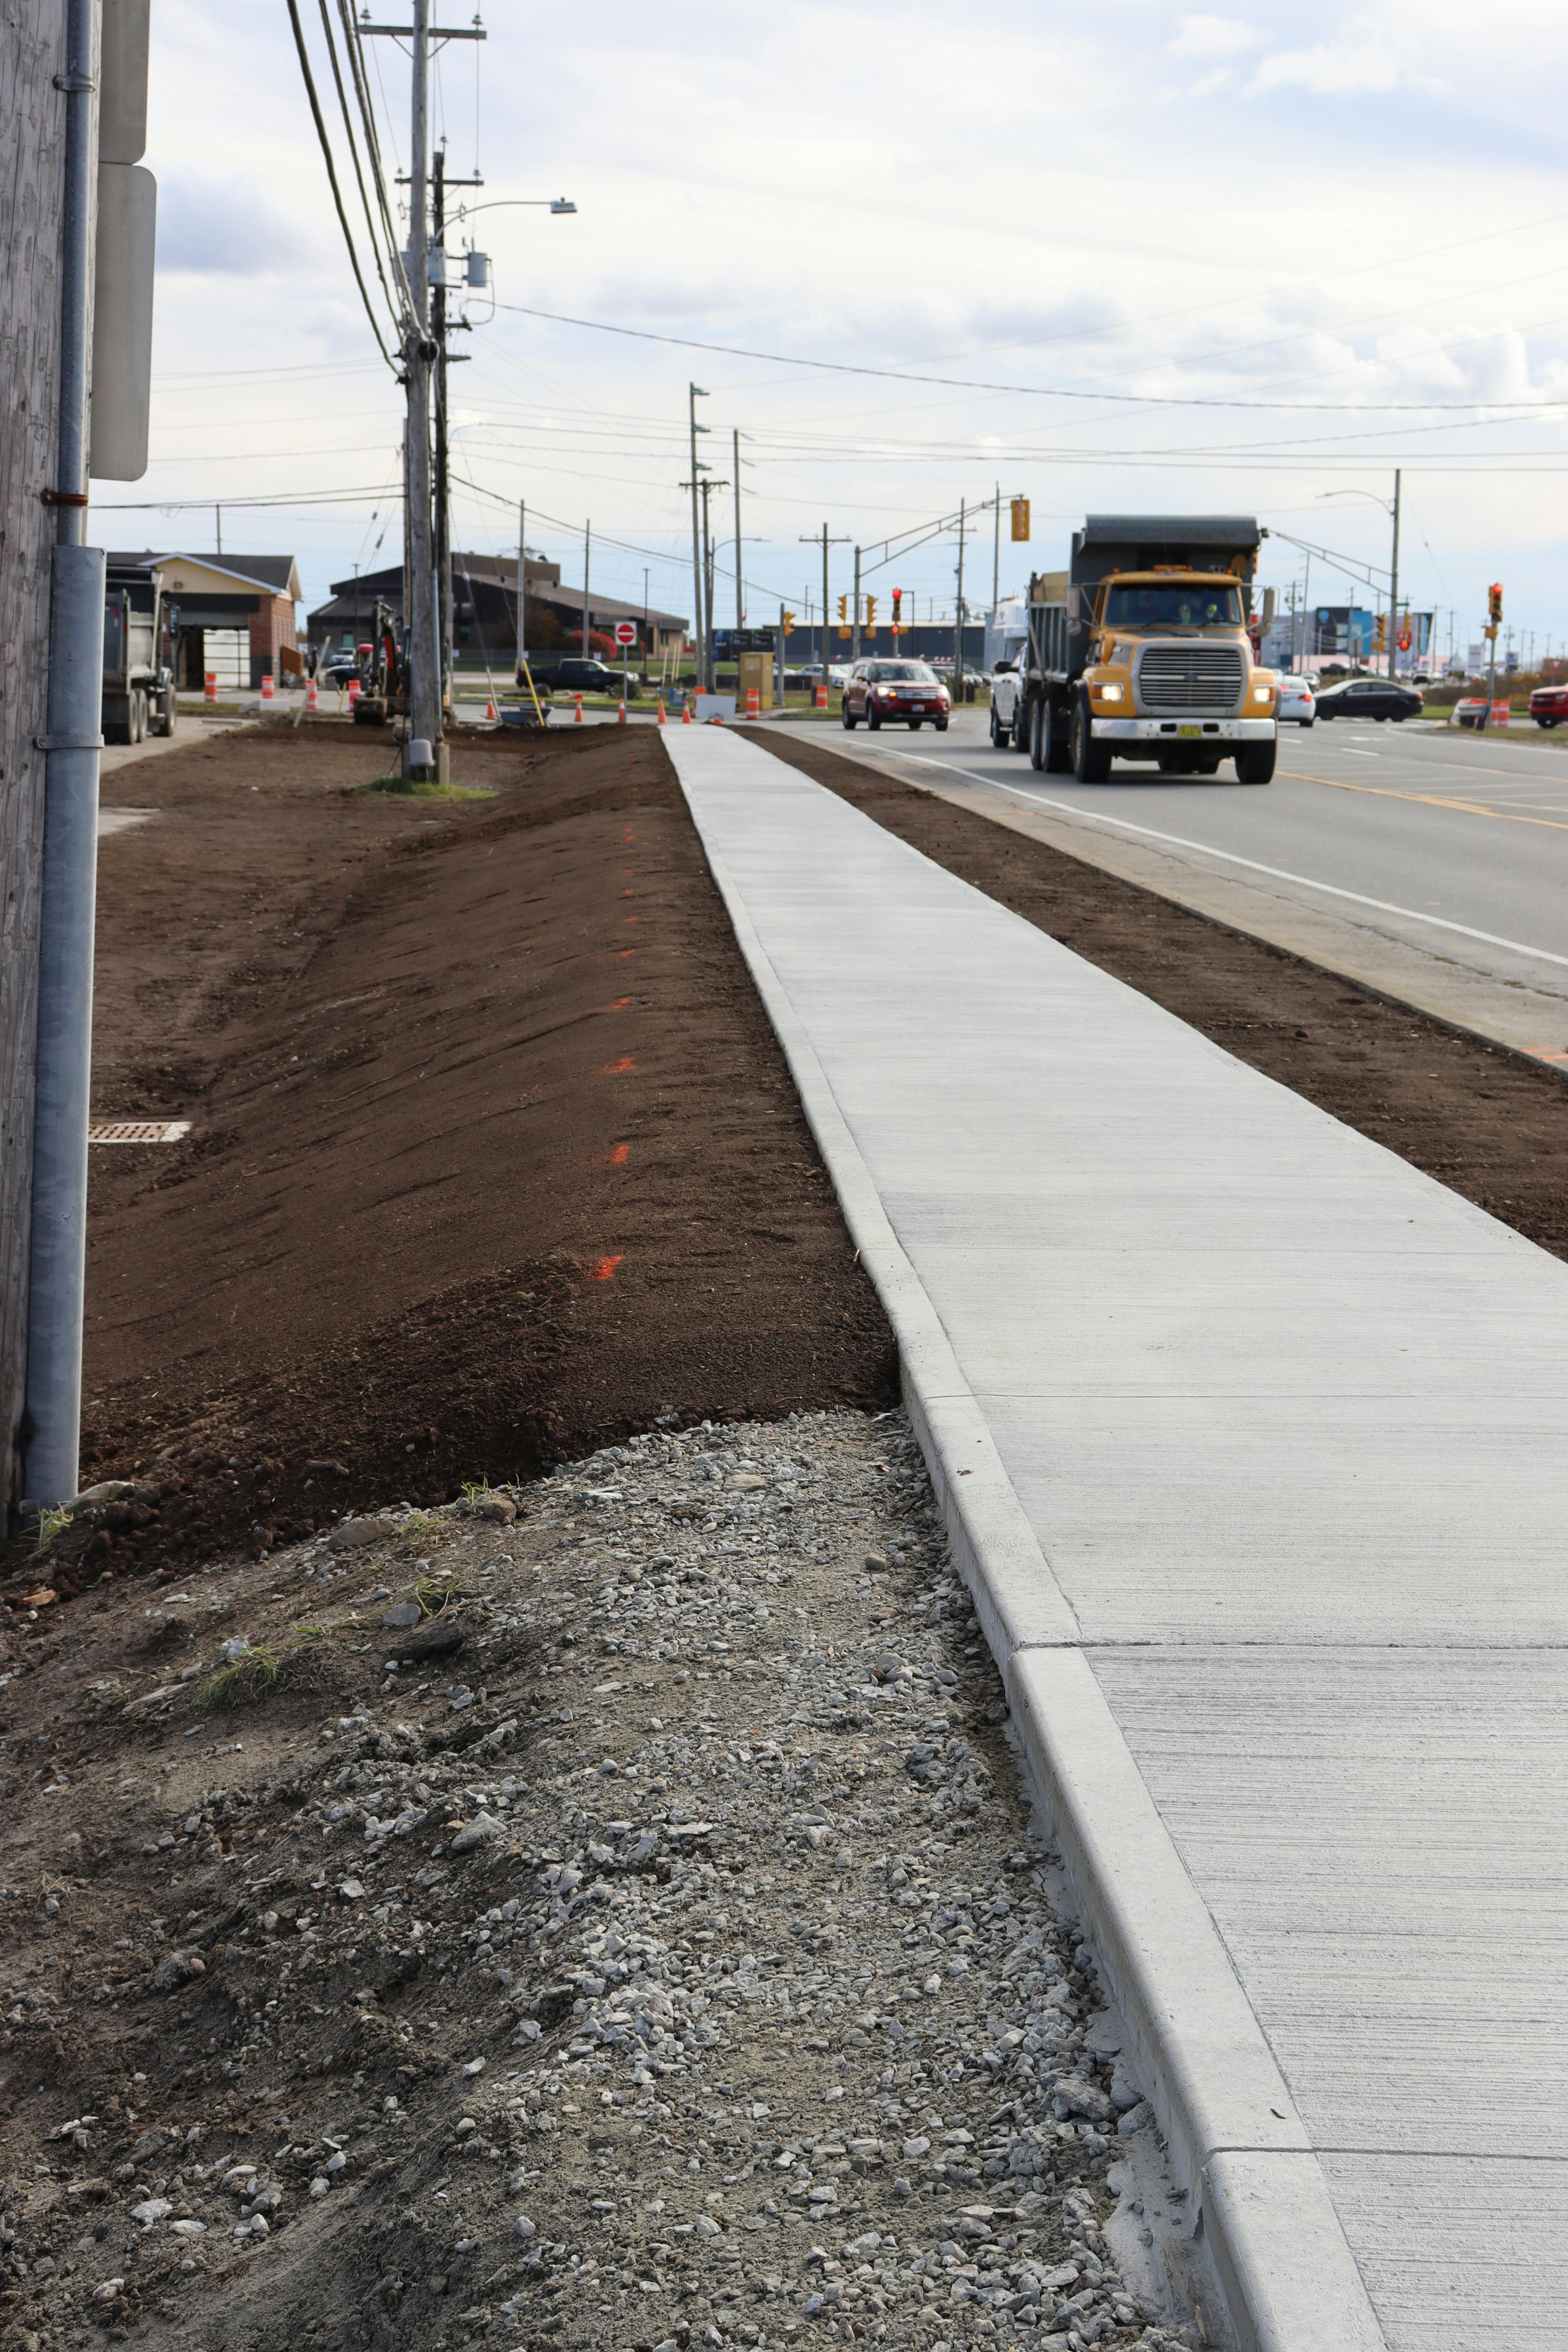 Landscaping work as the sidewalk project on Starrs Road is completed.